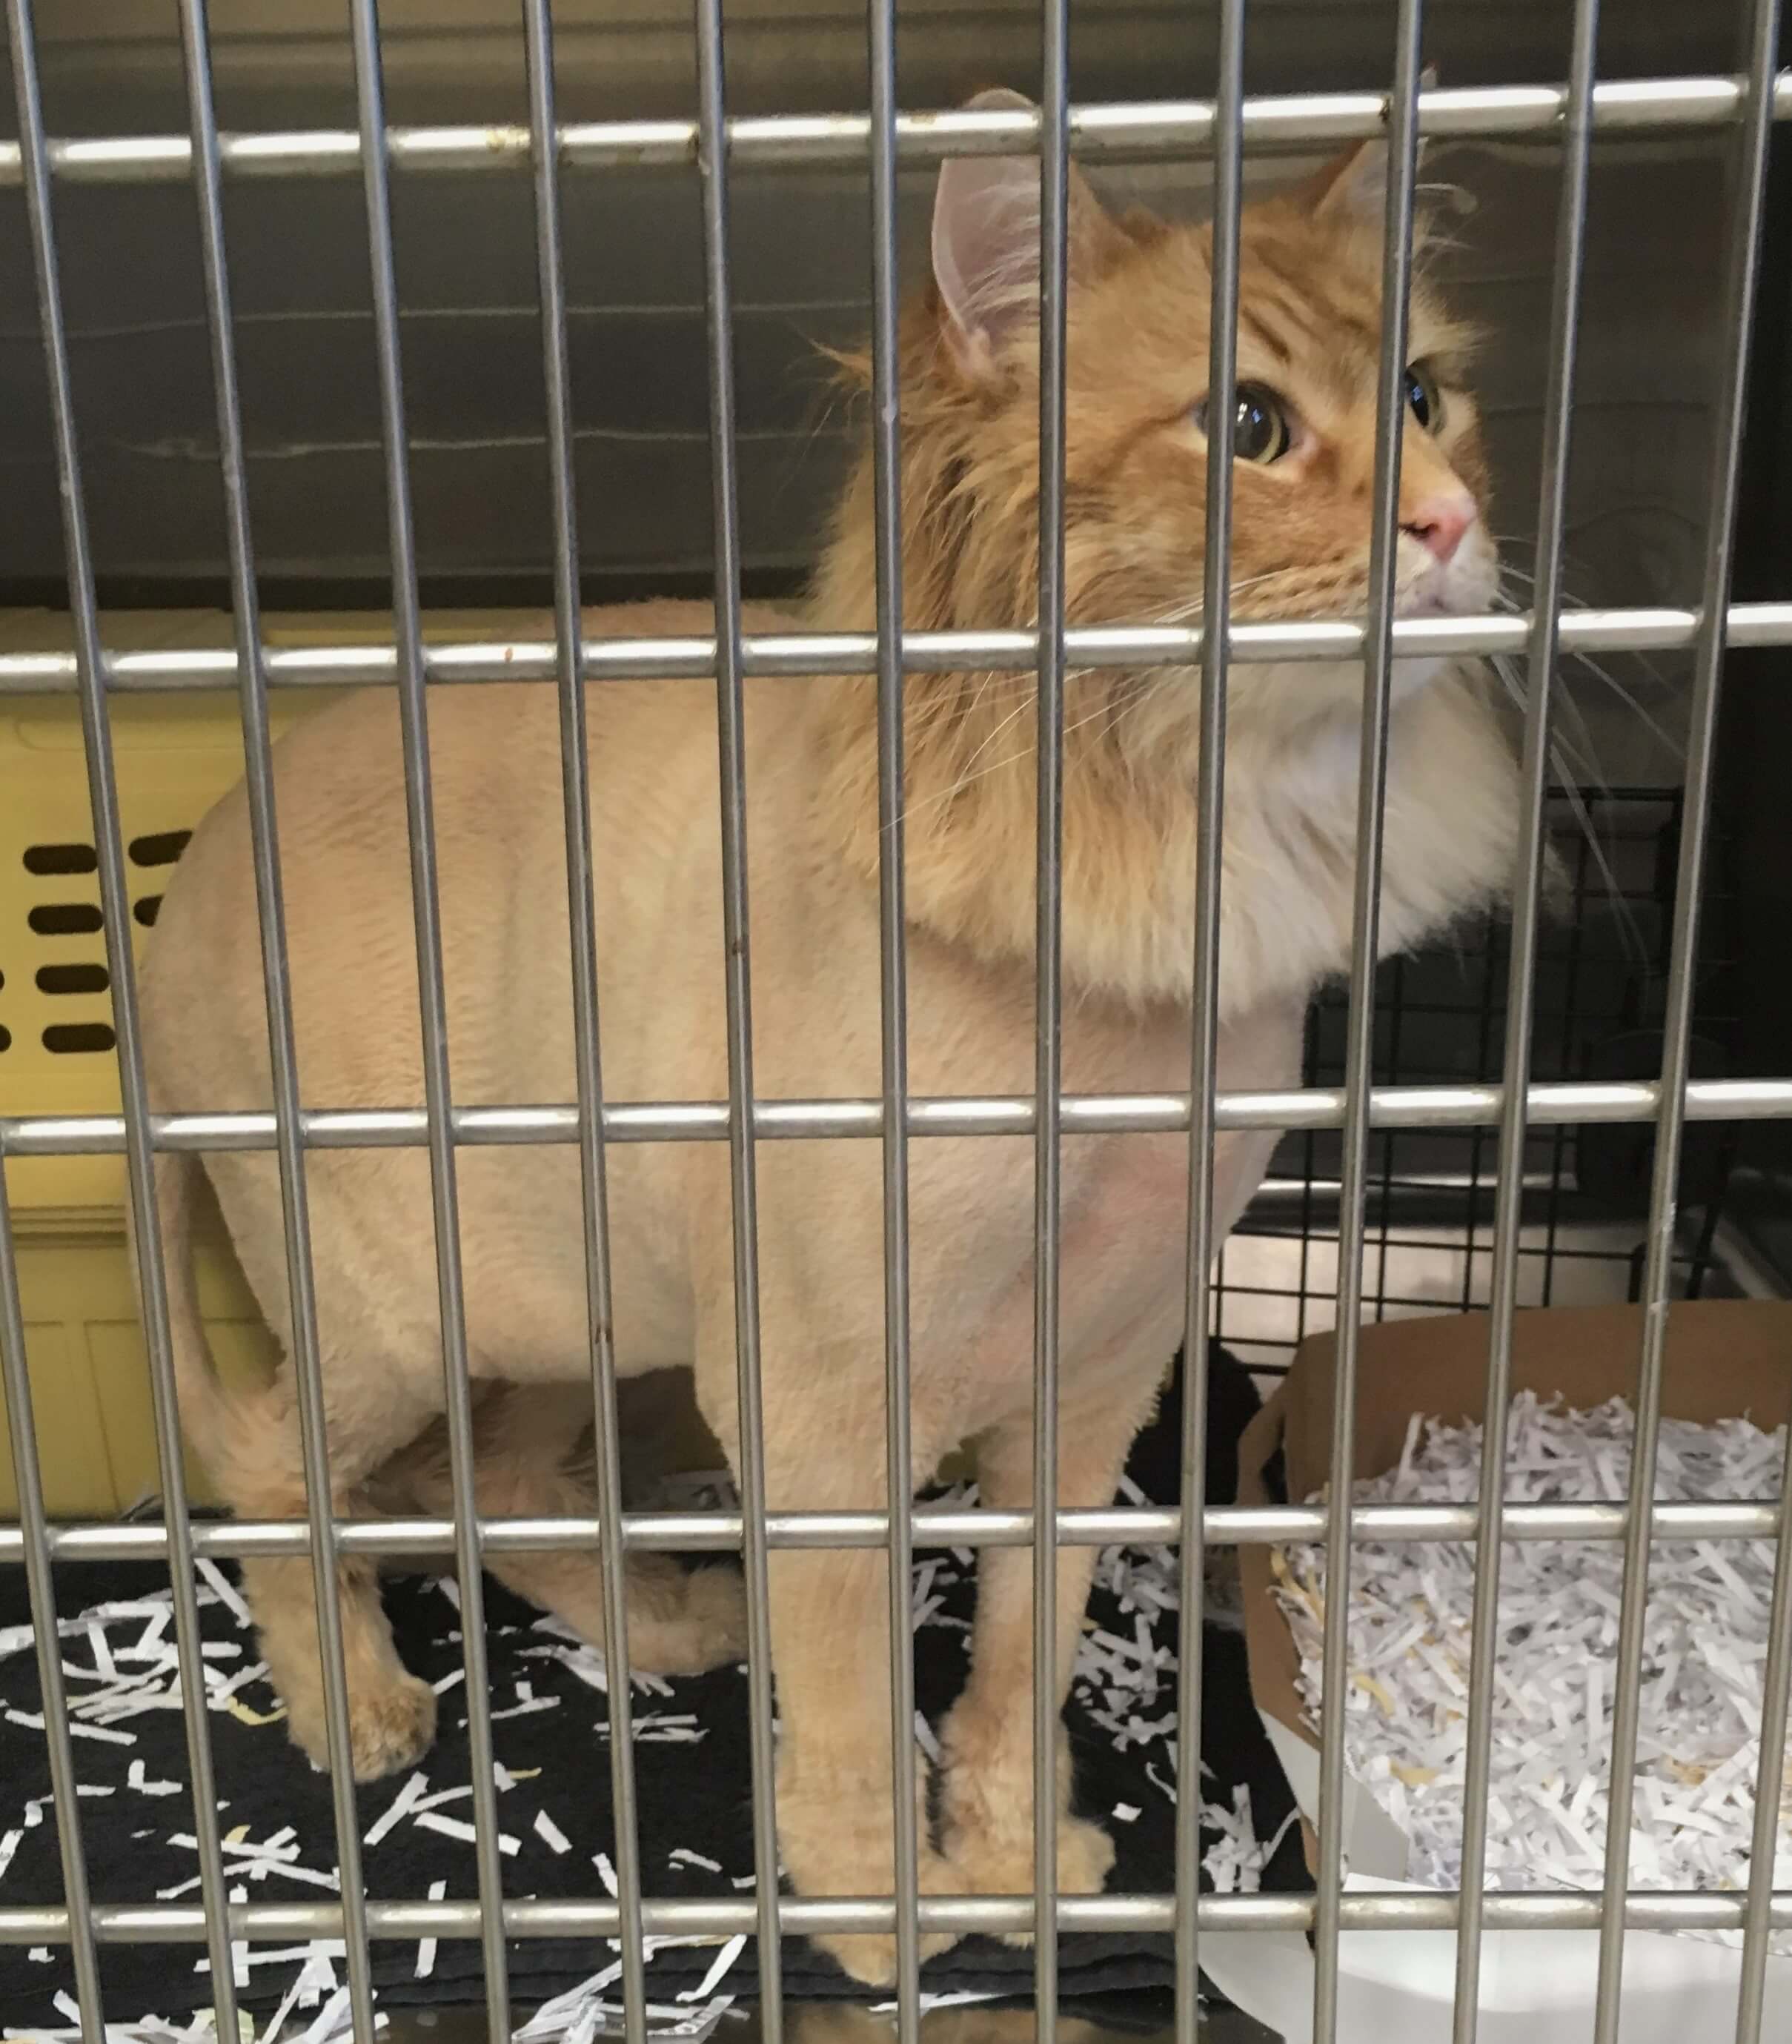 Orange cat with lion cut in cage looking up